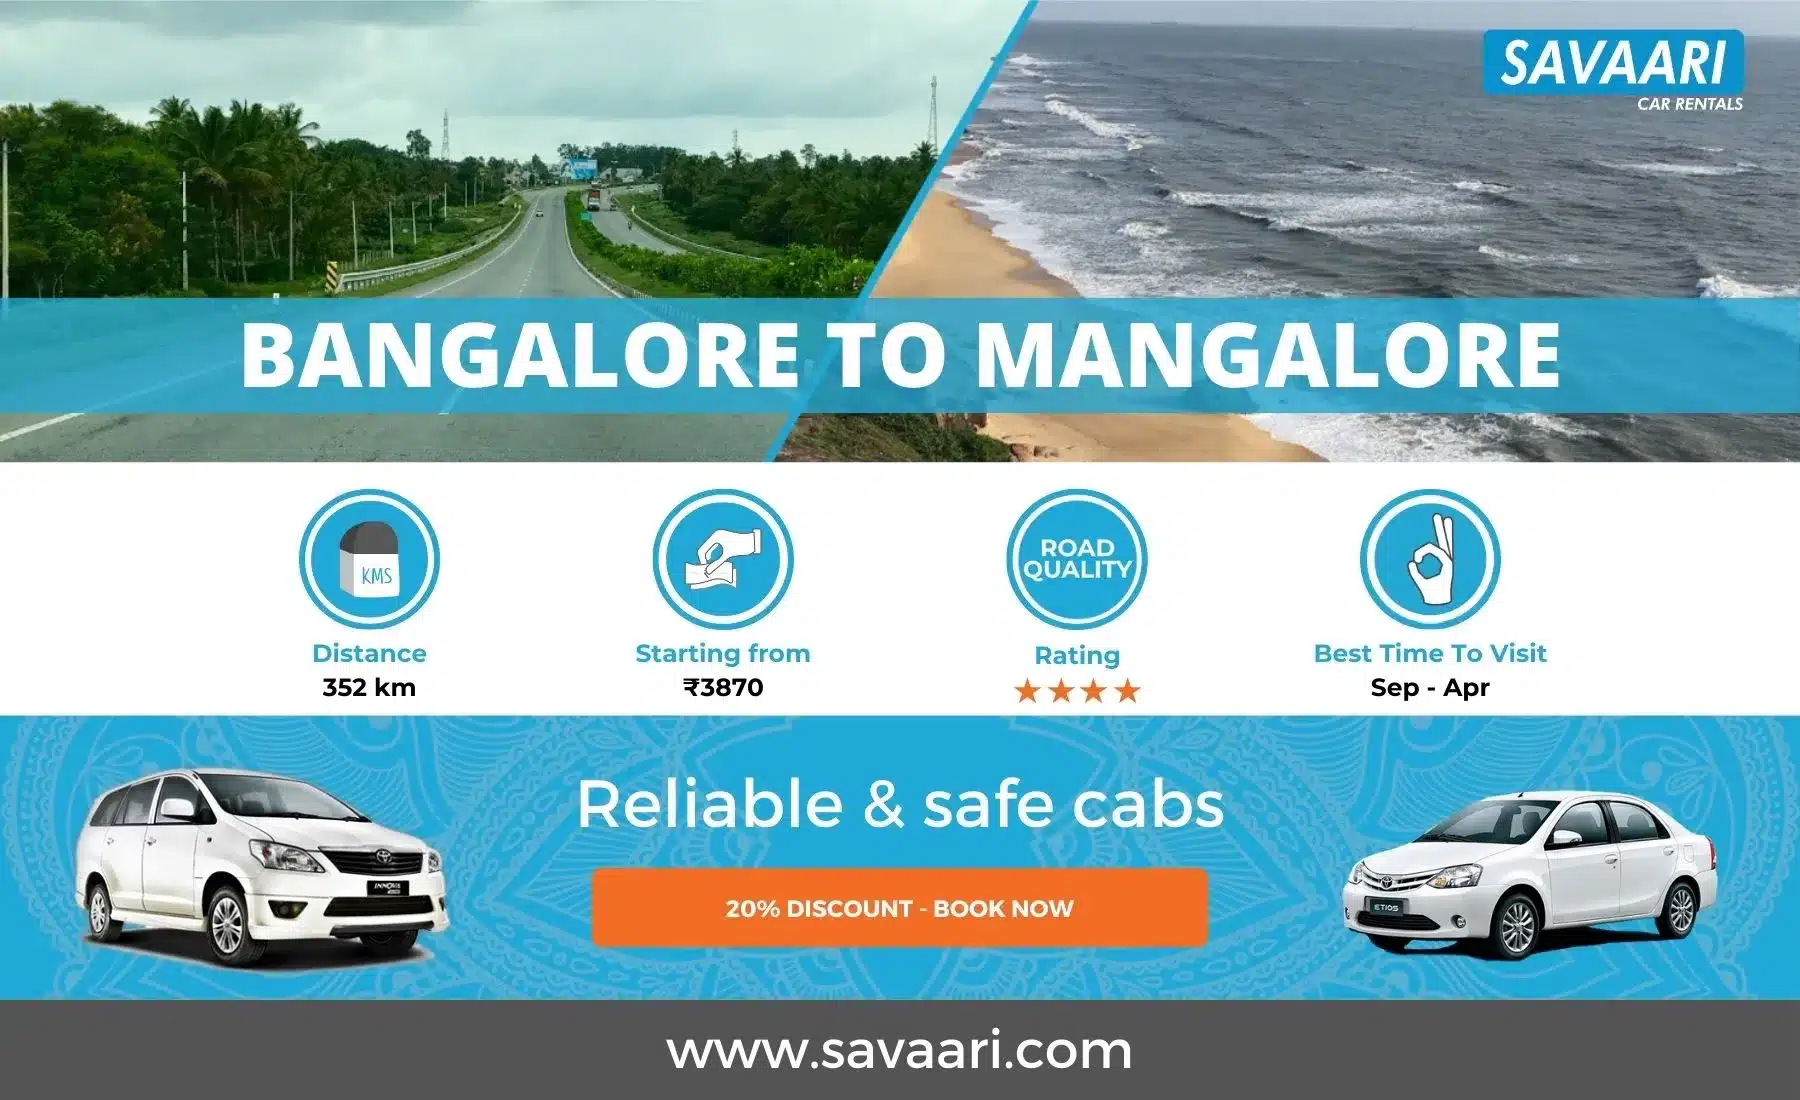 Bangalore to Mangalore by road information